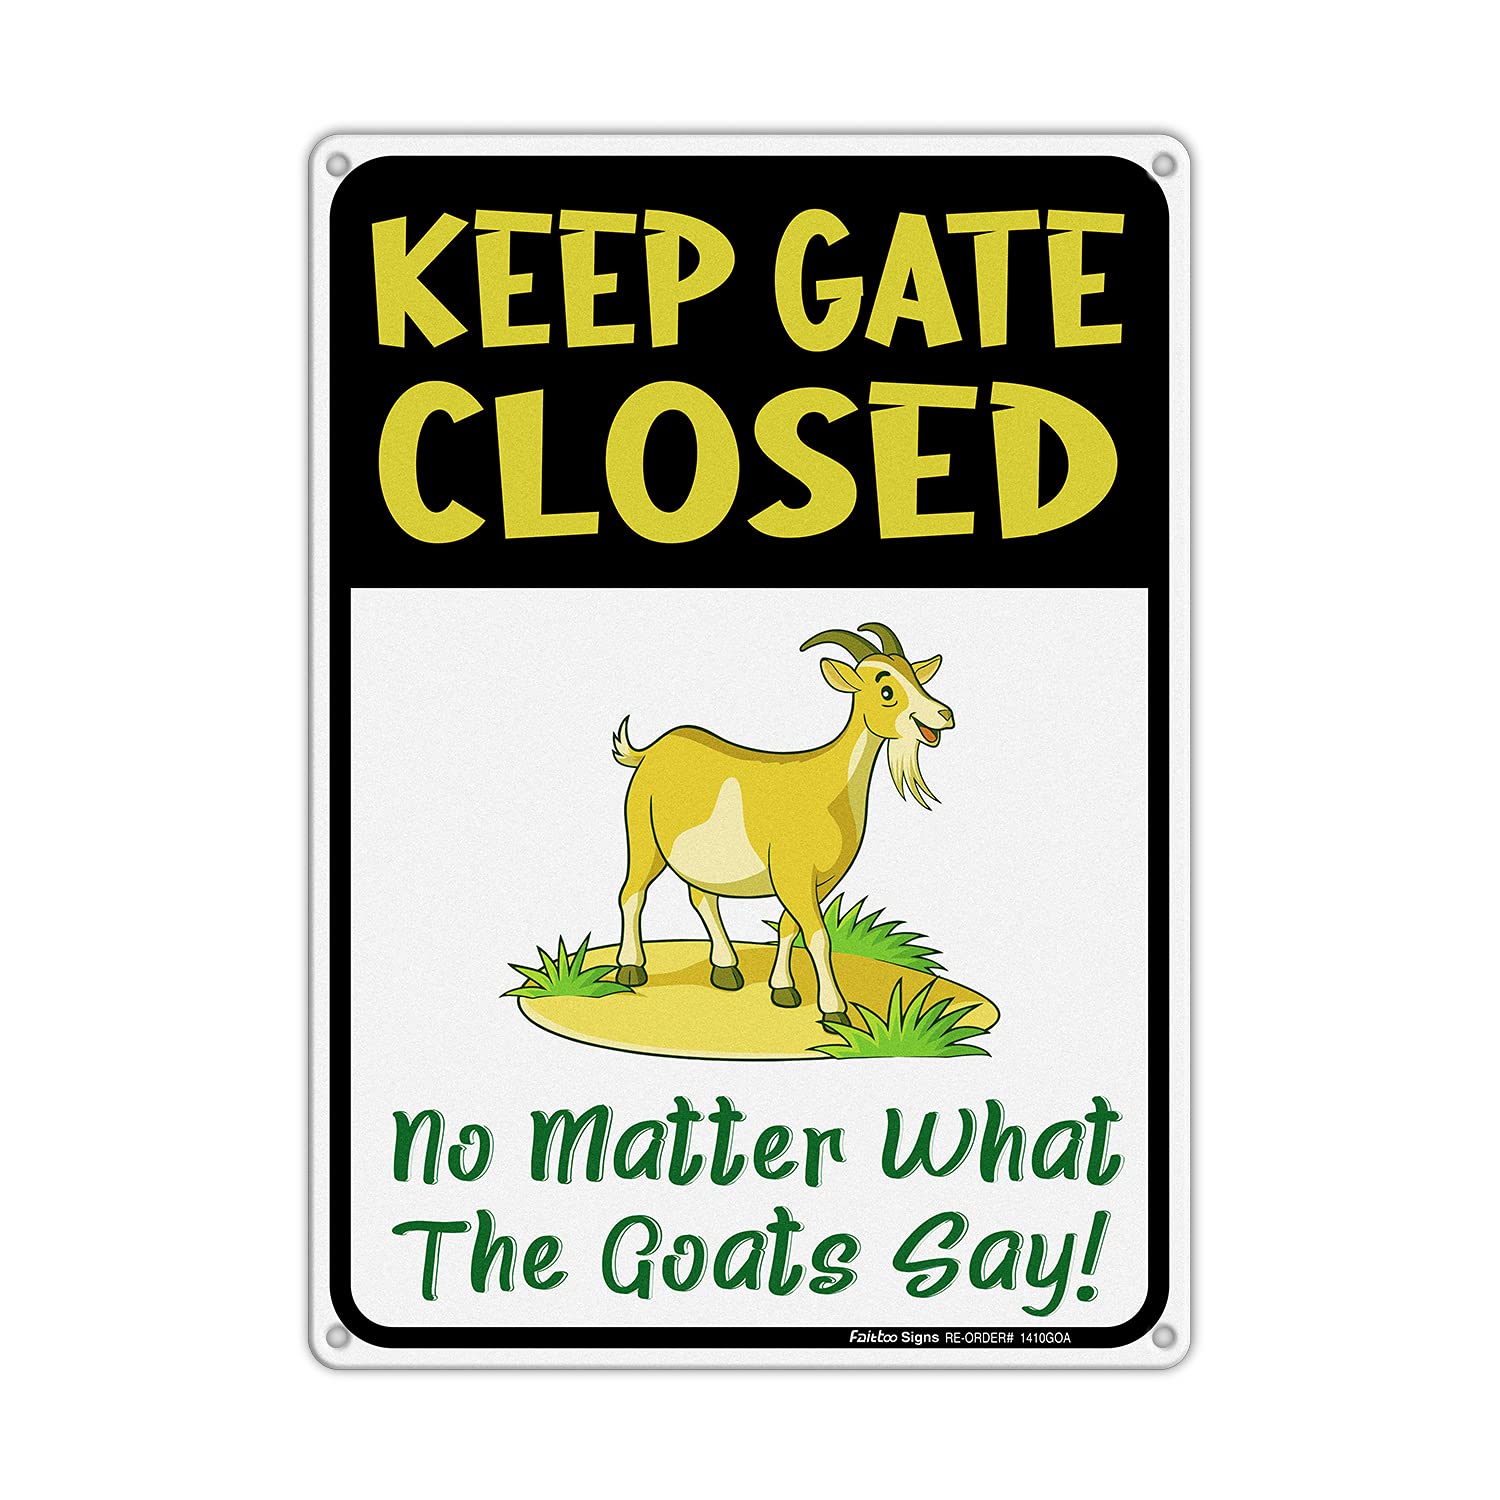 Keep Gate Closed Sign No Matter What The Goats Say, Goat Signs for Outside, Goat Decorations, Warning Sign,14x10 In, Rustfree Aluminum, Weather/Fade Resistant, Easy Mounting, Indoor/Outdoor Use